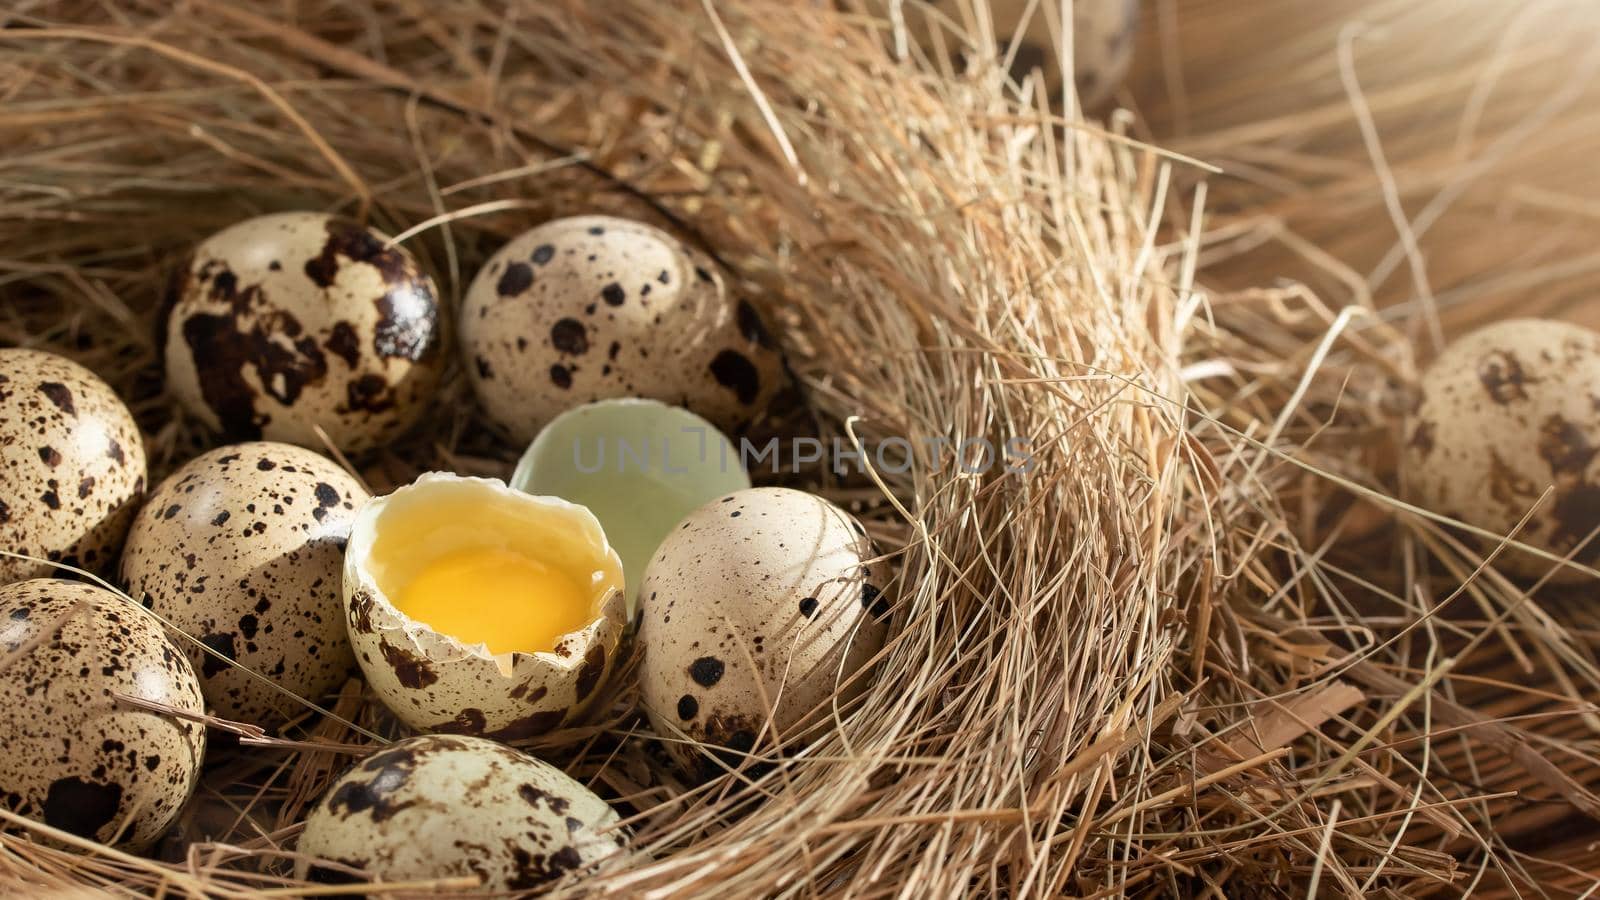 Several quail eggs in a decorative nest made of straw on a wooden table close-up, horizontal banner.